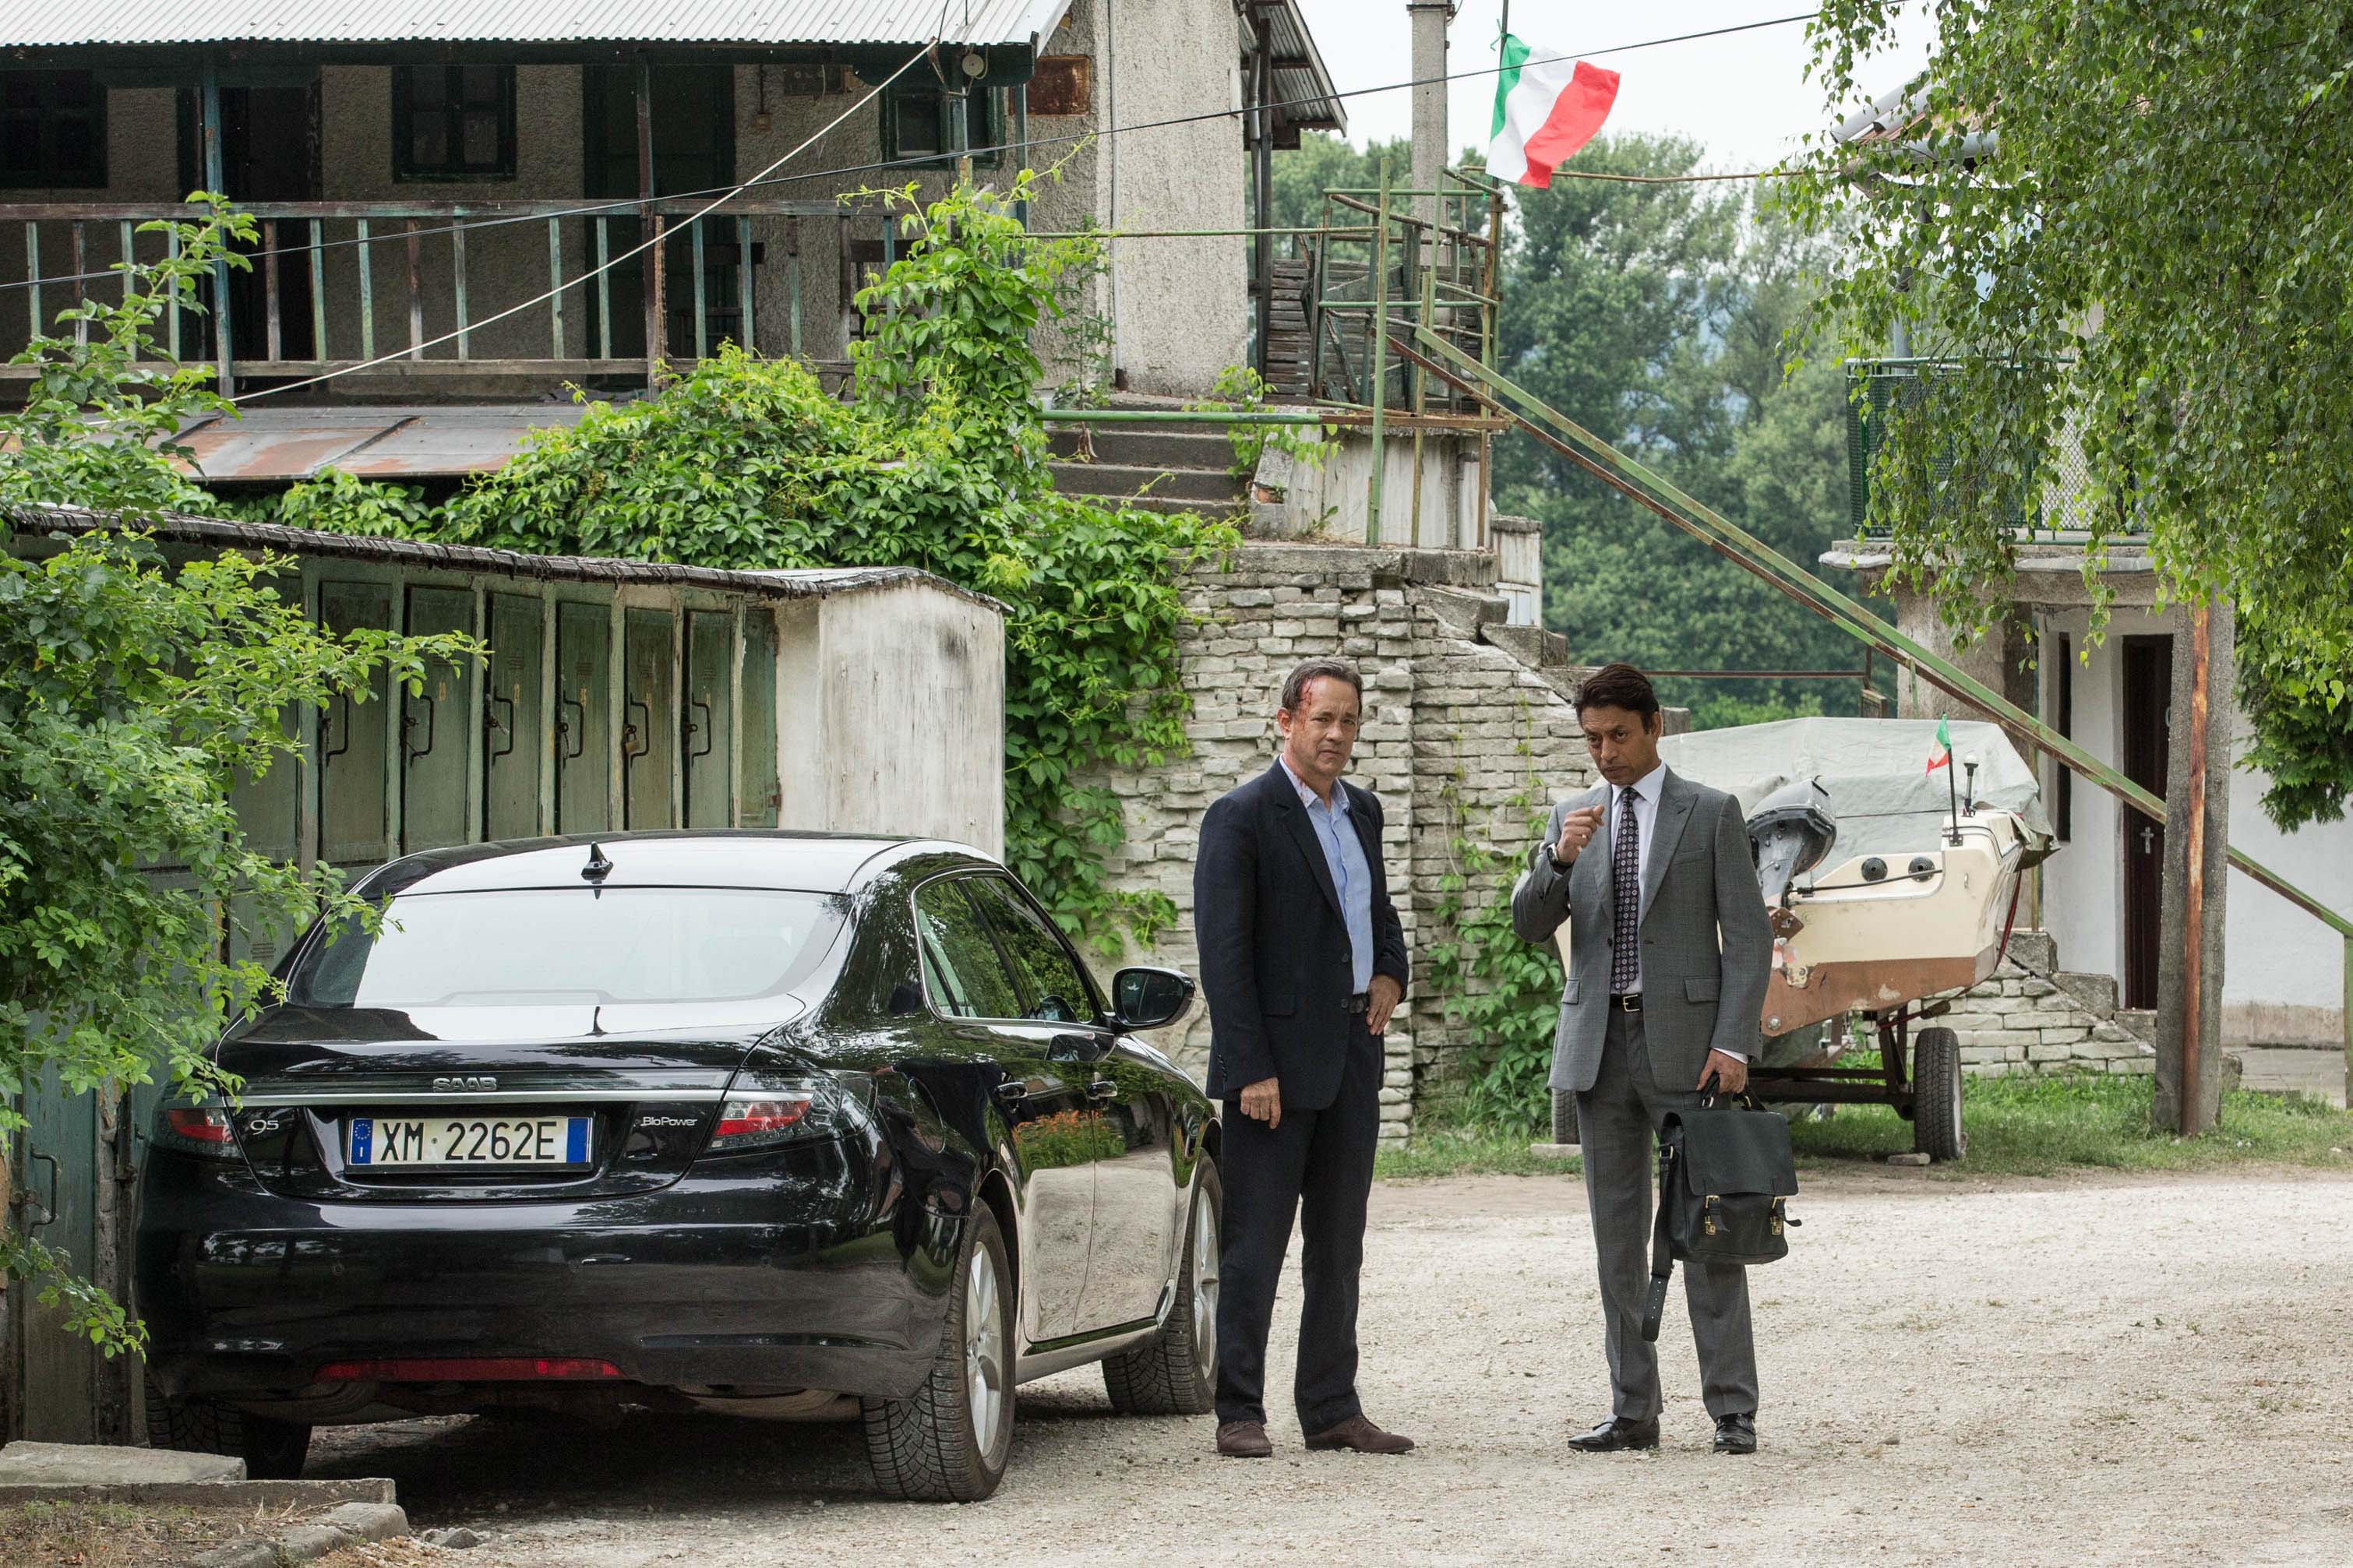 Tom Hanks and Irrfan Kahn star in Columbia Pictures' "Inferno," also starring Felicity Jones.